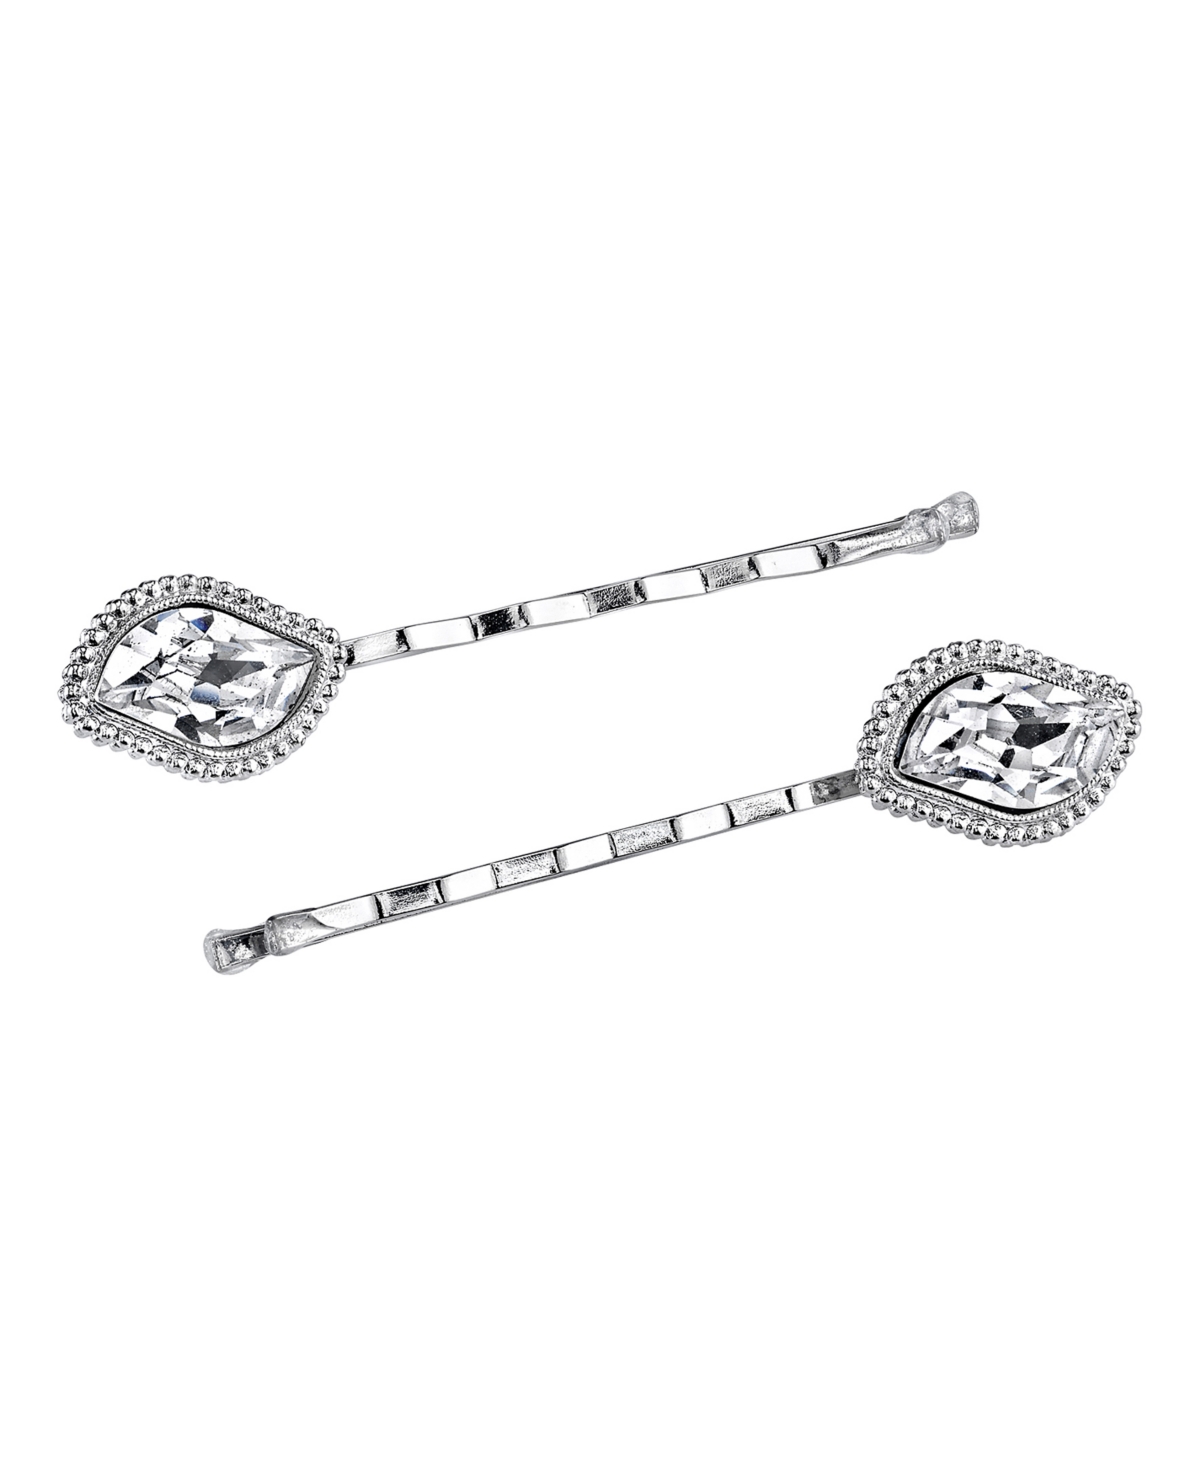 2028 Women's Silver-tone Crystal Bobby Pin Set, 2 Piece In White